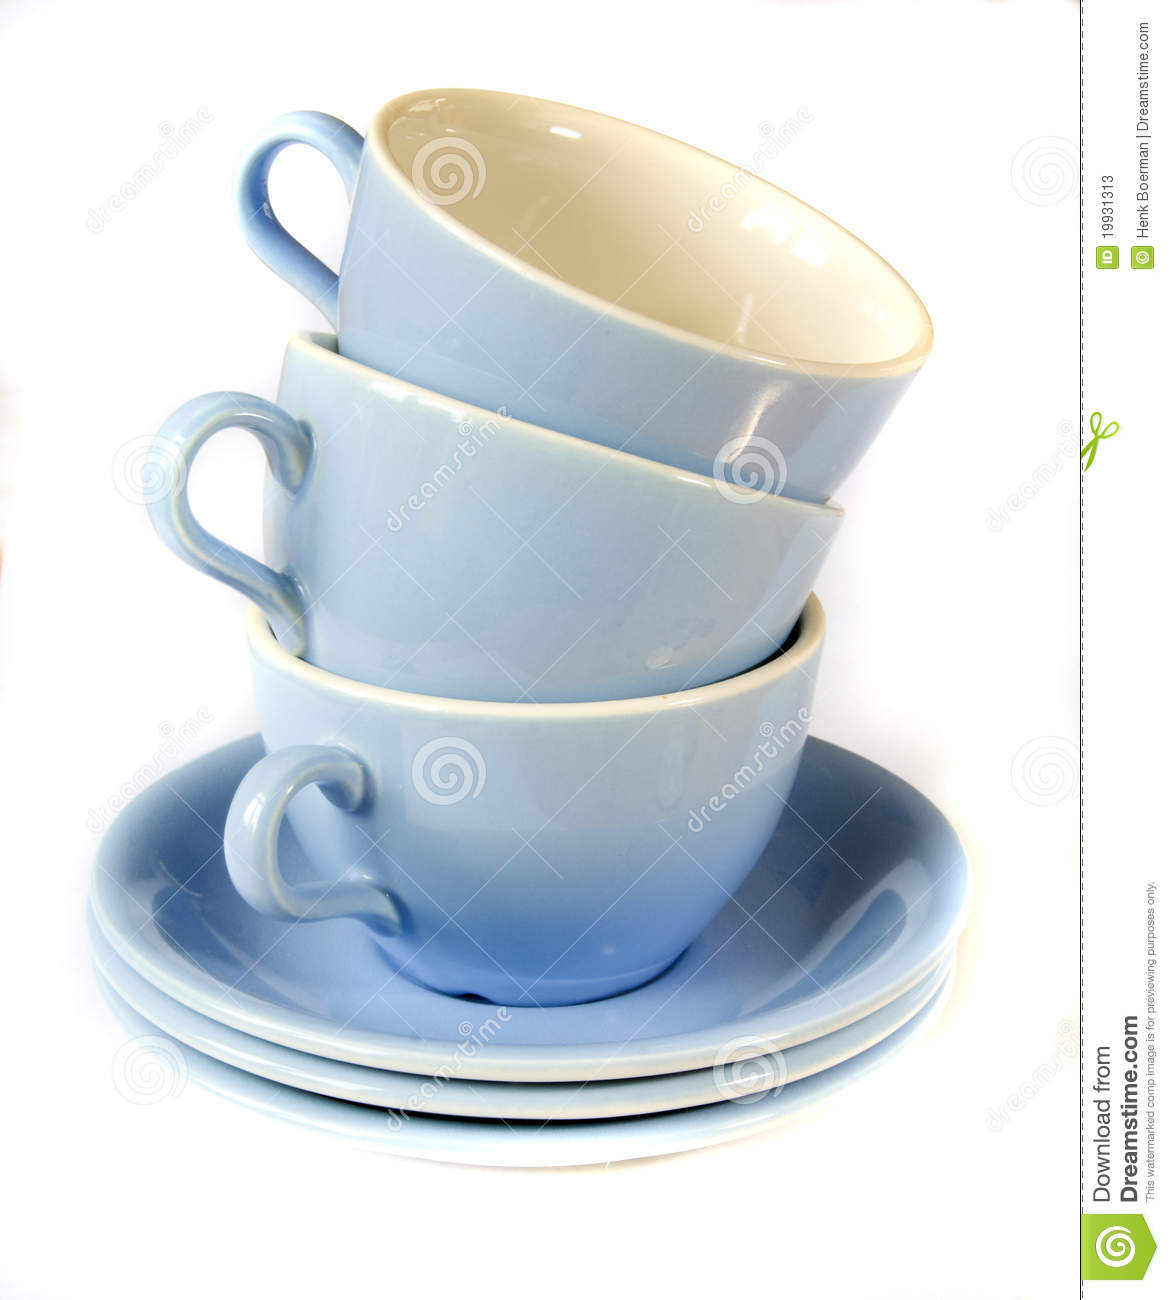 Cups And Plates Stock Photos   Image  19931313